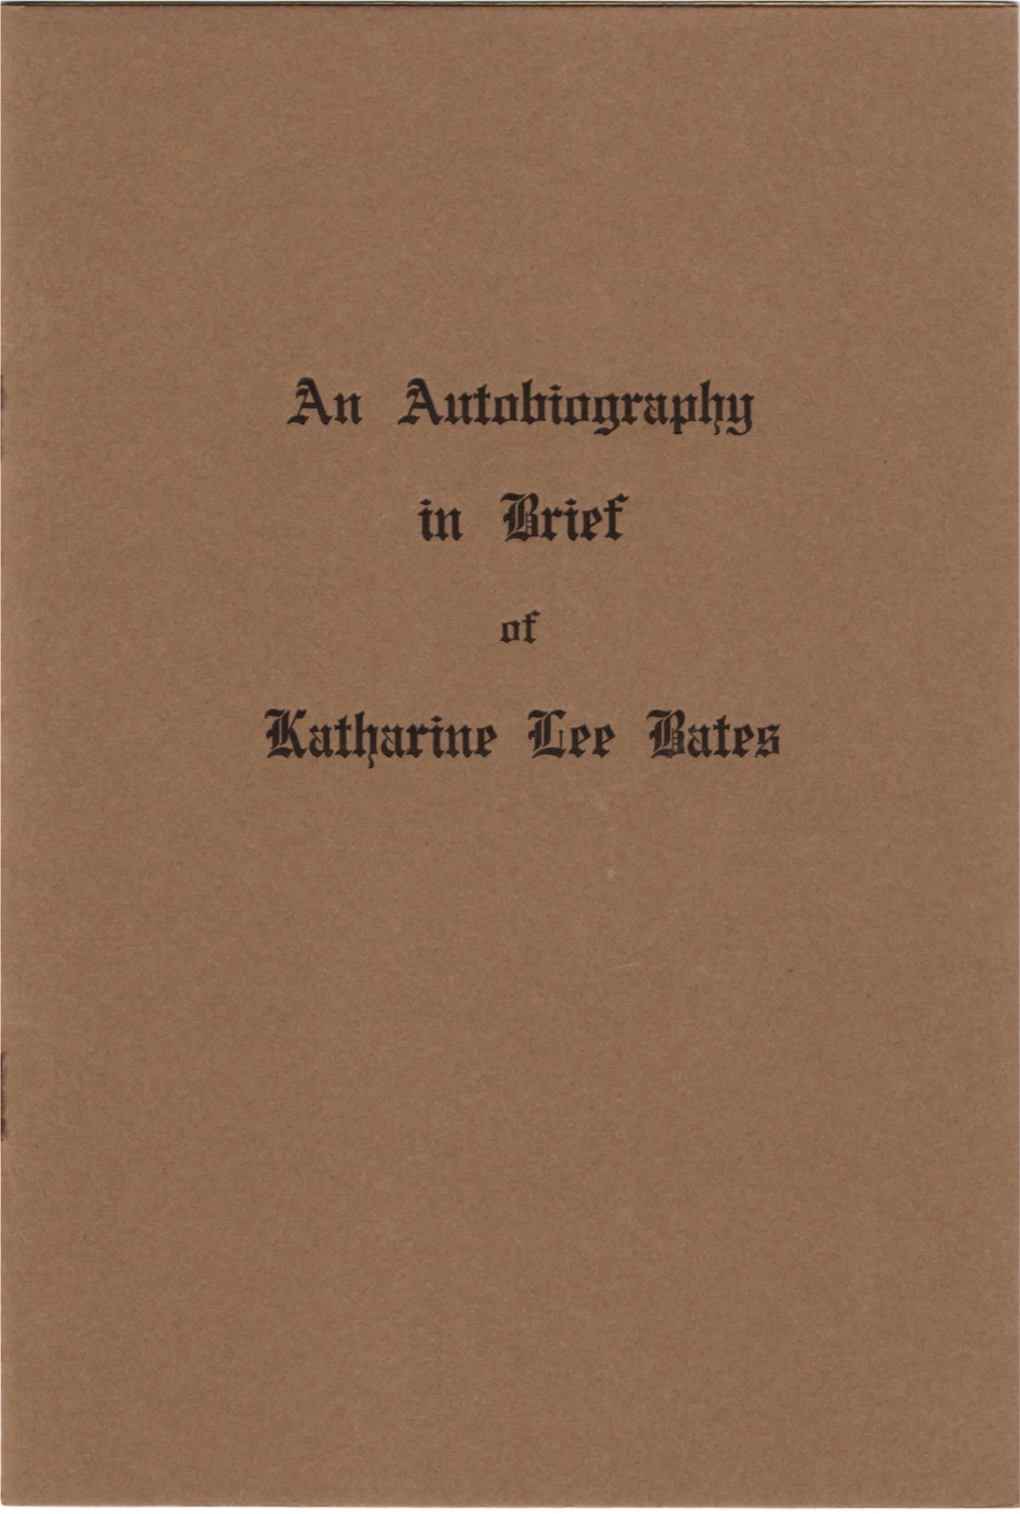 An Autobiography in Brief of Katharine Lee Bates, 1930